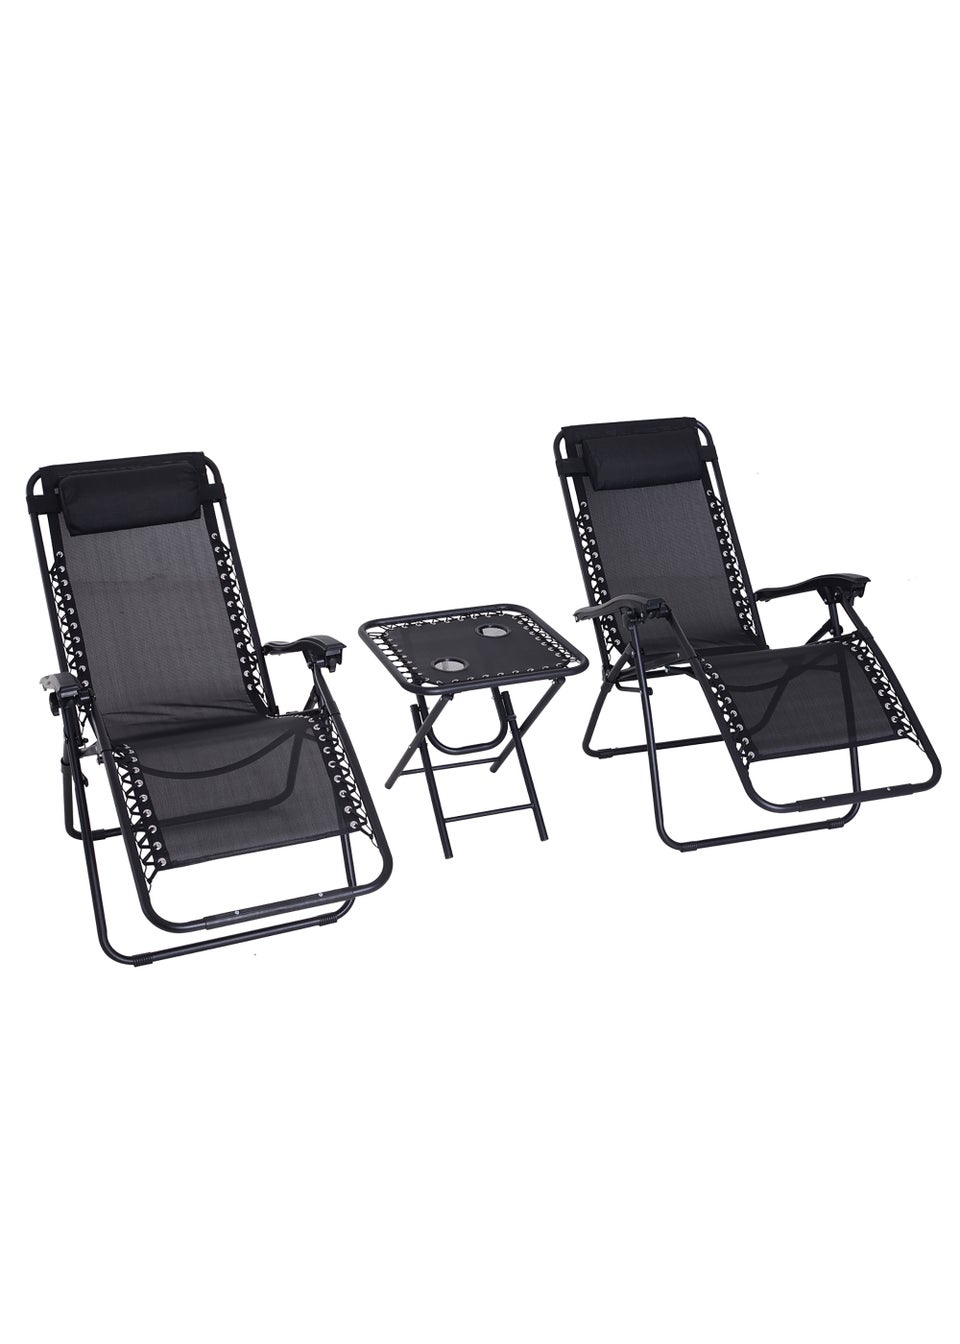 Outsunny 3 PCs Sun Lounger Table & Chairs Set with Cup Holders